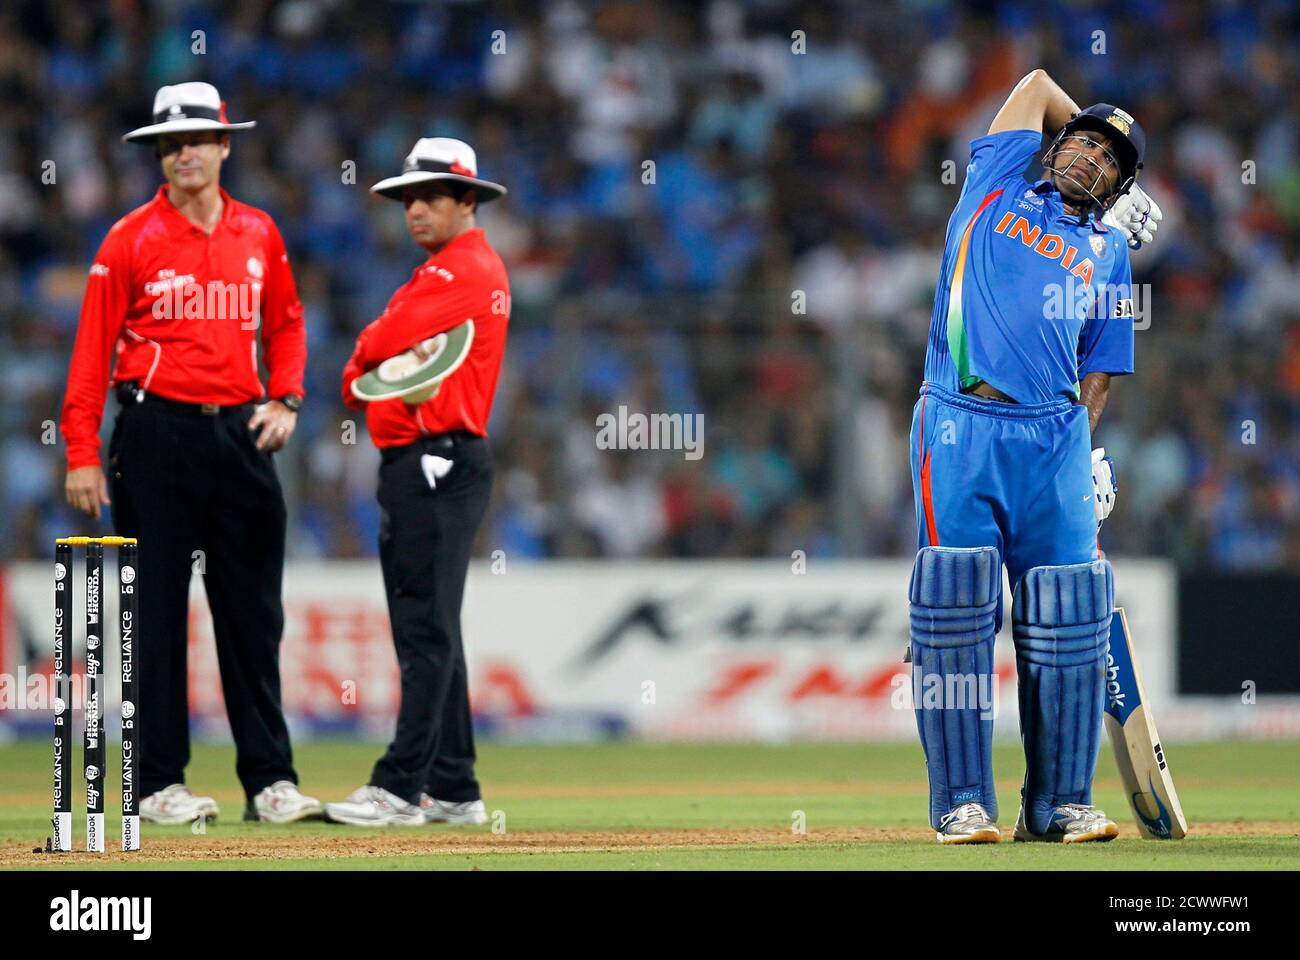 India's captain Mahendra Singh Dhoni (R) stretches as umpires Aleem Dar and Simon Taufel (L) stand together during their ICC Cricket World Cup final match against Sri Lanka in Mumbai April 2, 2011.                      REUTERS/Adnan Abidi (INDIA  - Tags: SPORT CRICKET) Stock Photo